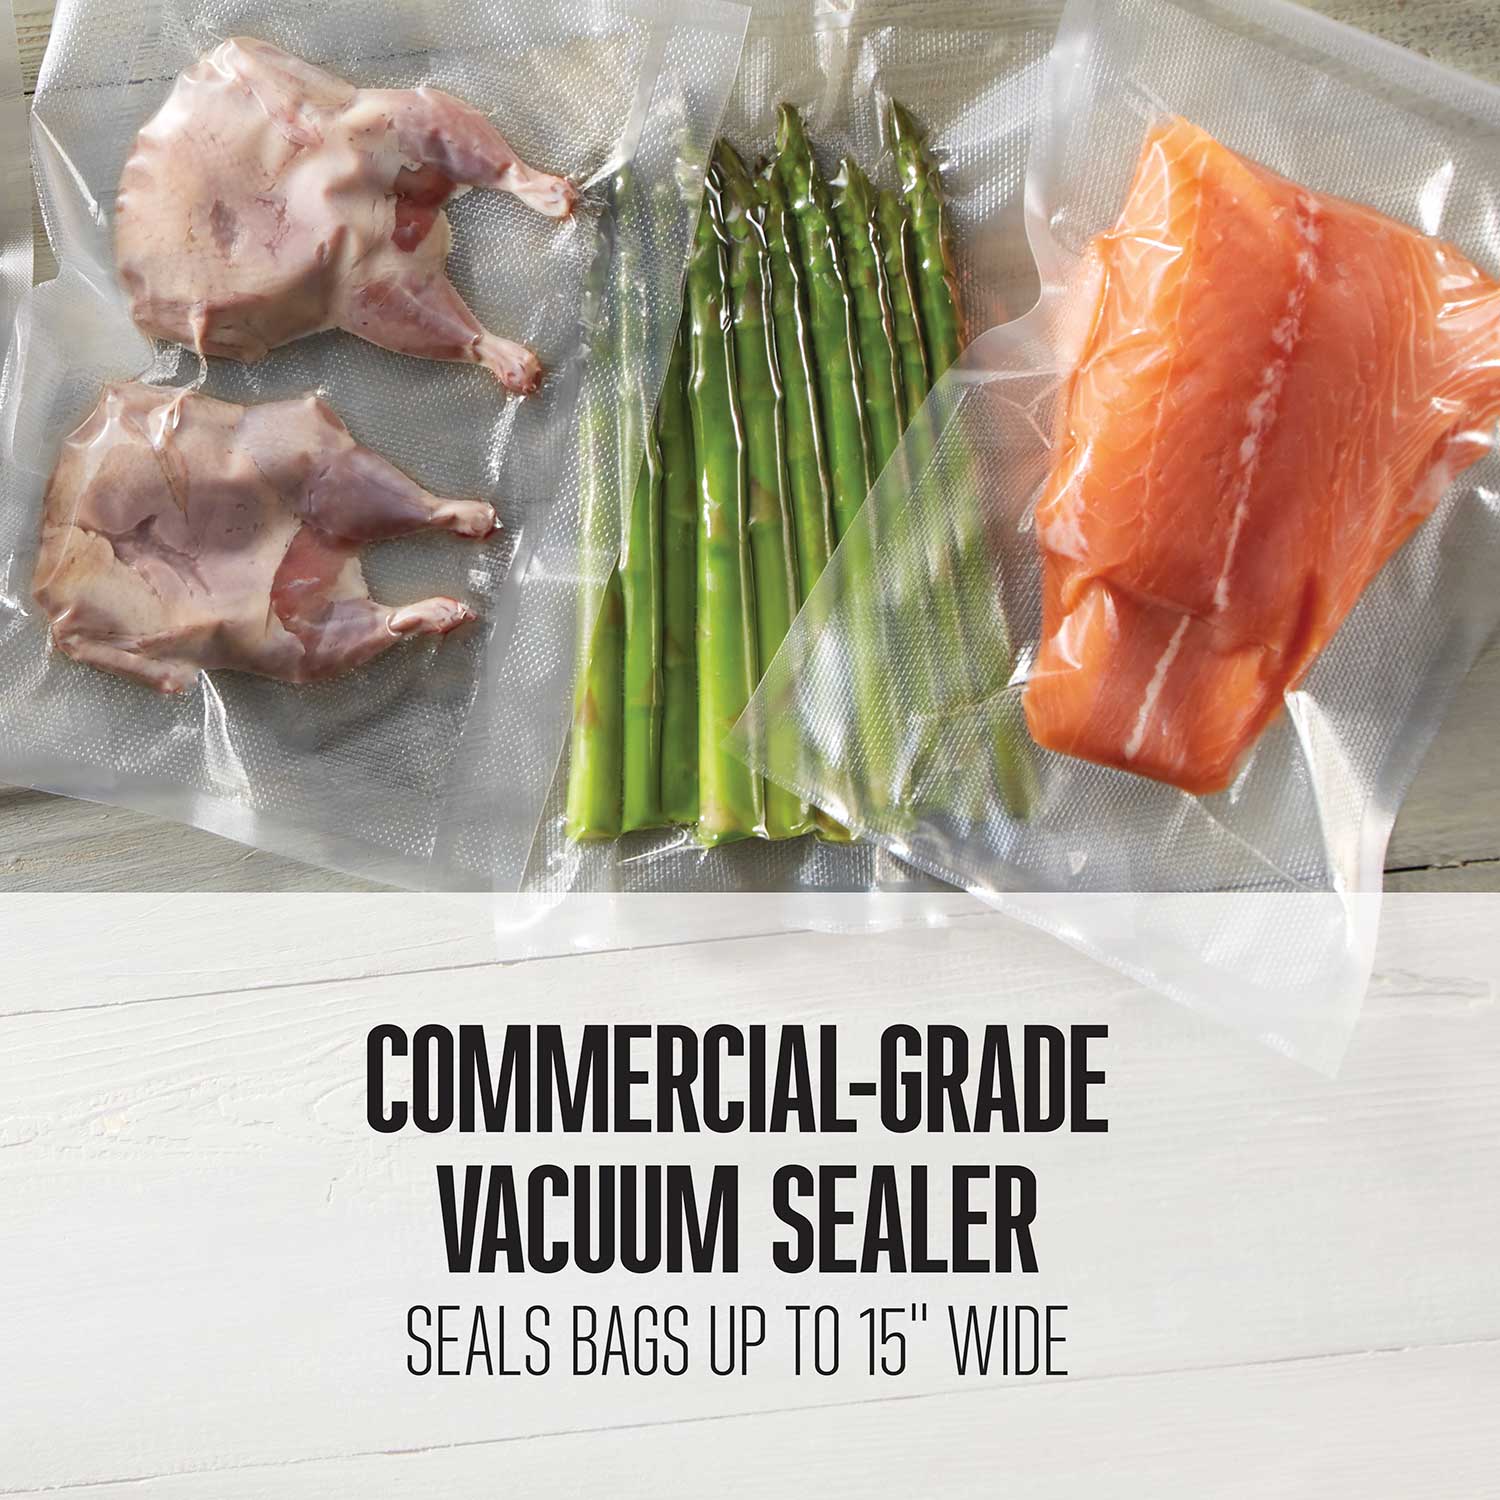 Weston Brands Vacuum Sealer Machine for Food Preservation & Sous Vide,  Extra-Wide Bar, Sealing Bags up to 16, 935 Watts, Commercial Grade Pro  2300